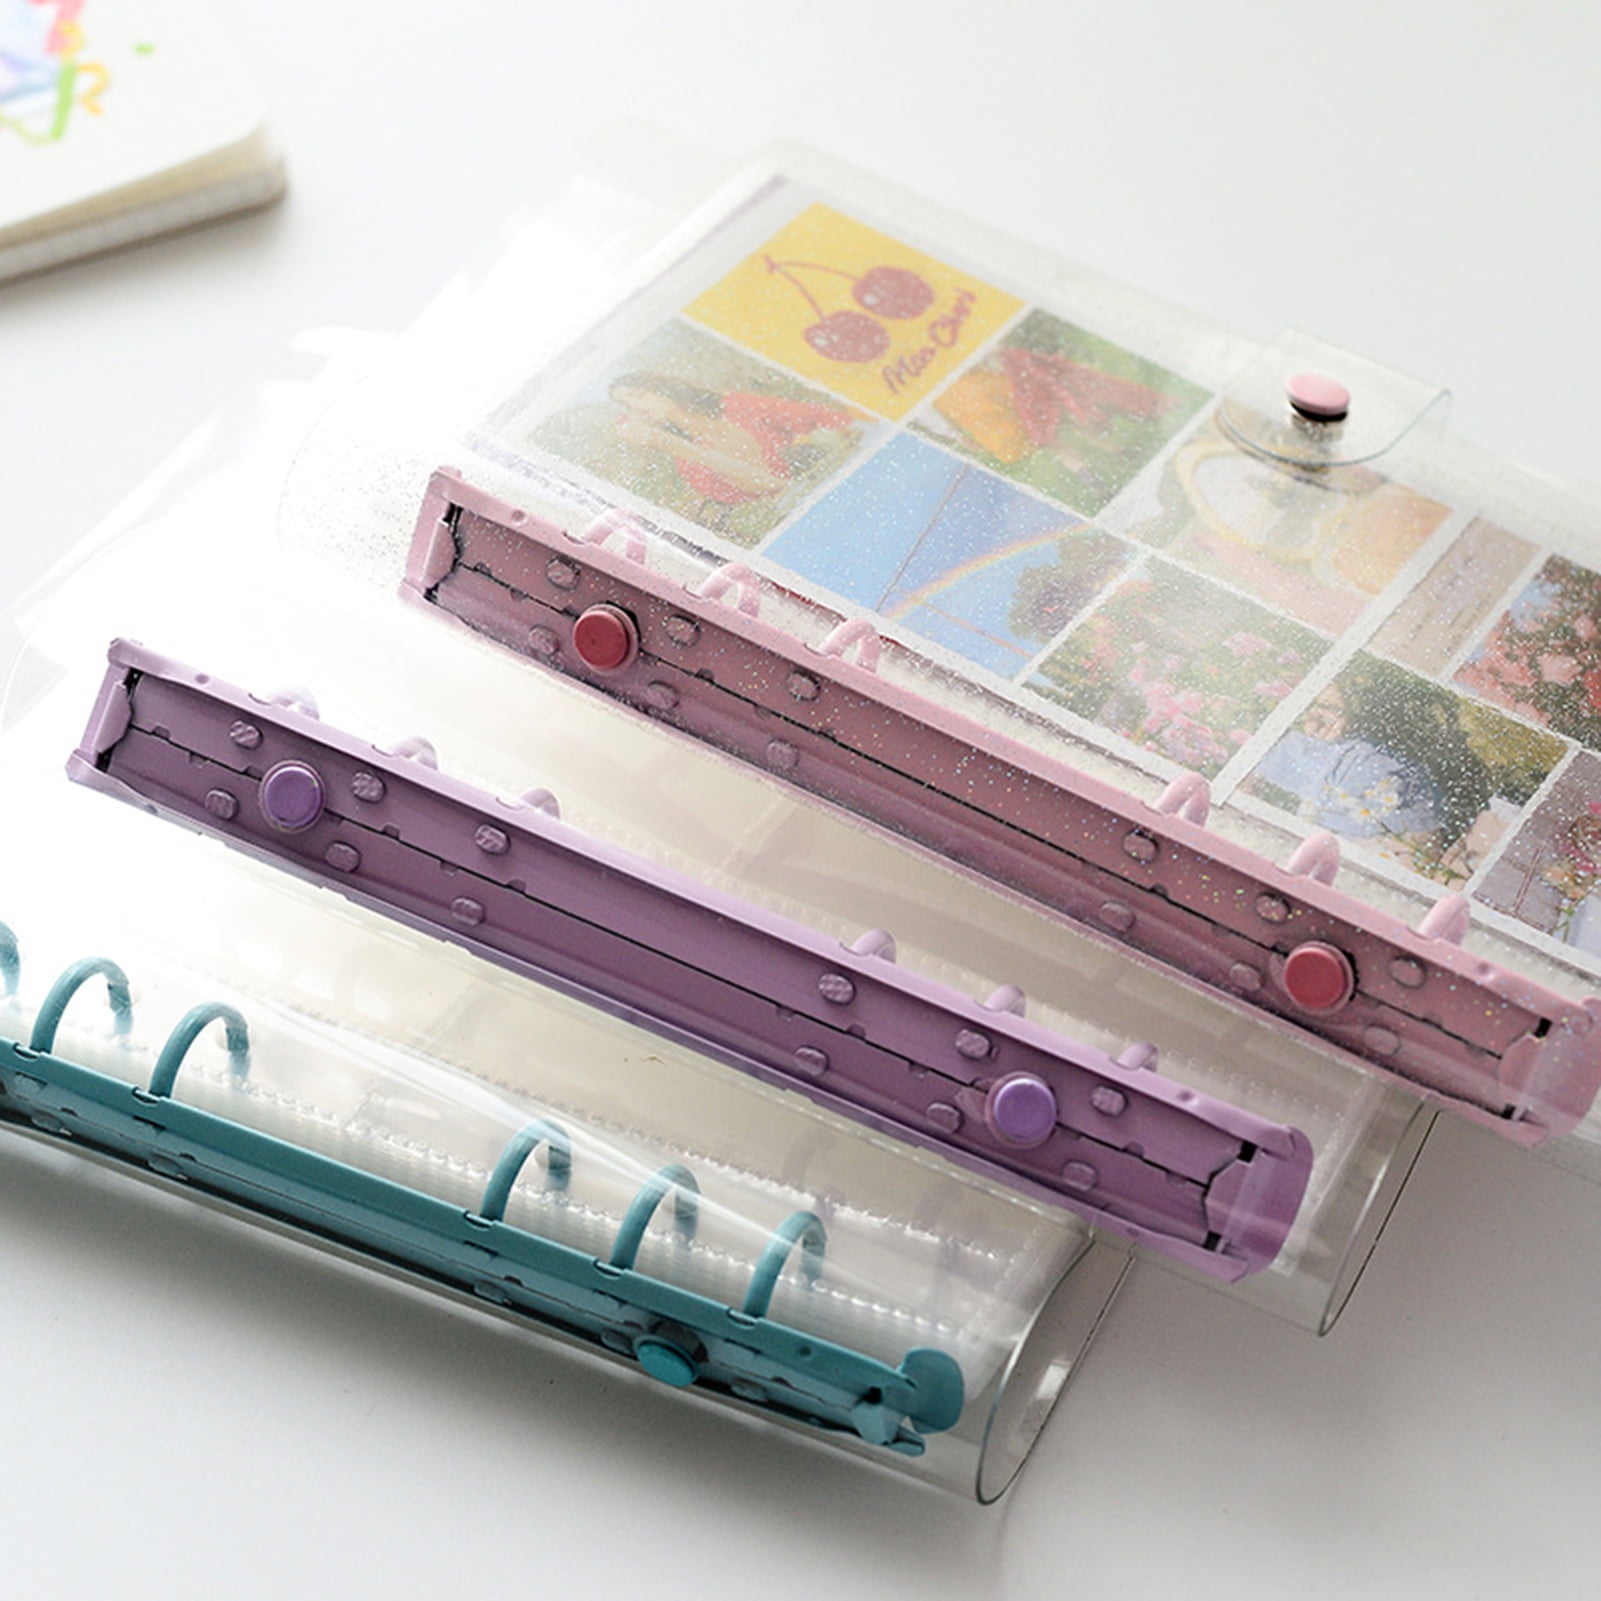 Classic 3 ring binder Album for Banknote Storage multiple pocket pages colours 